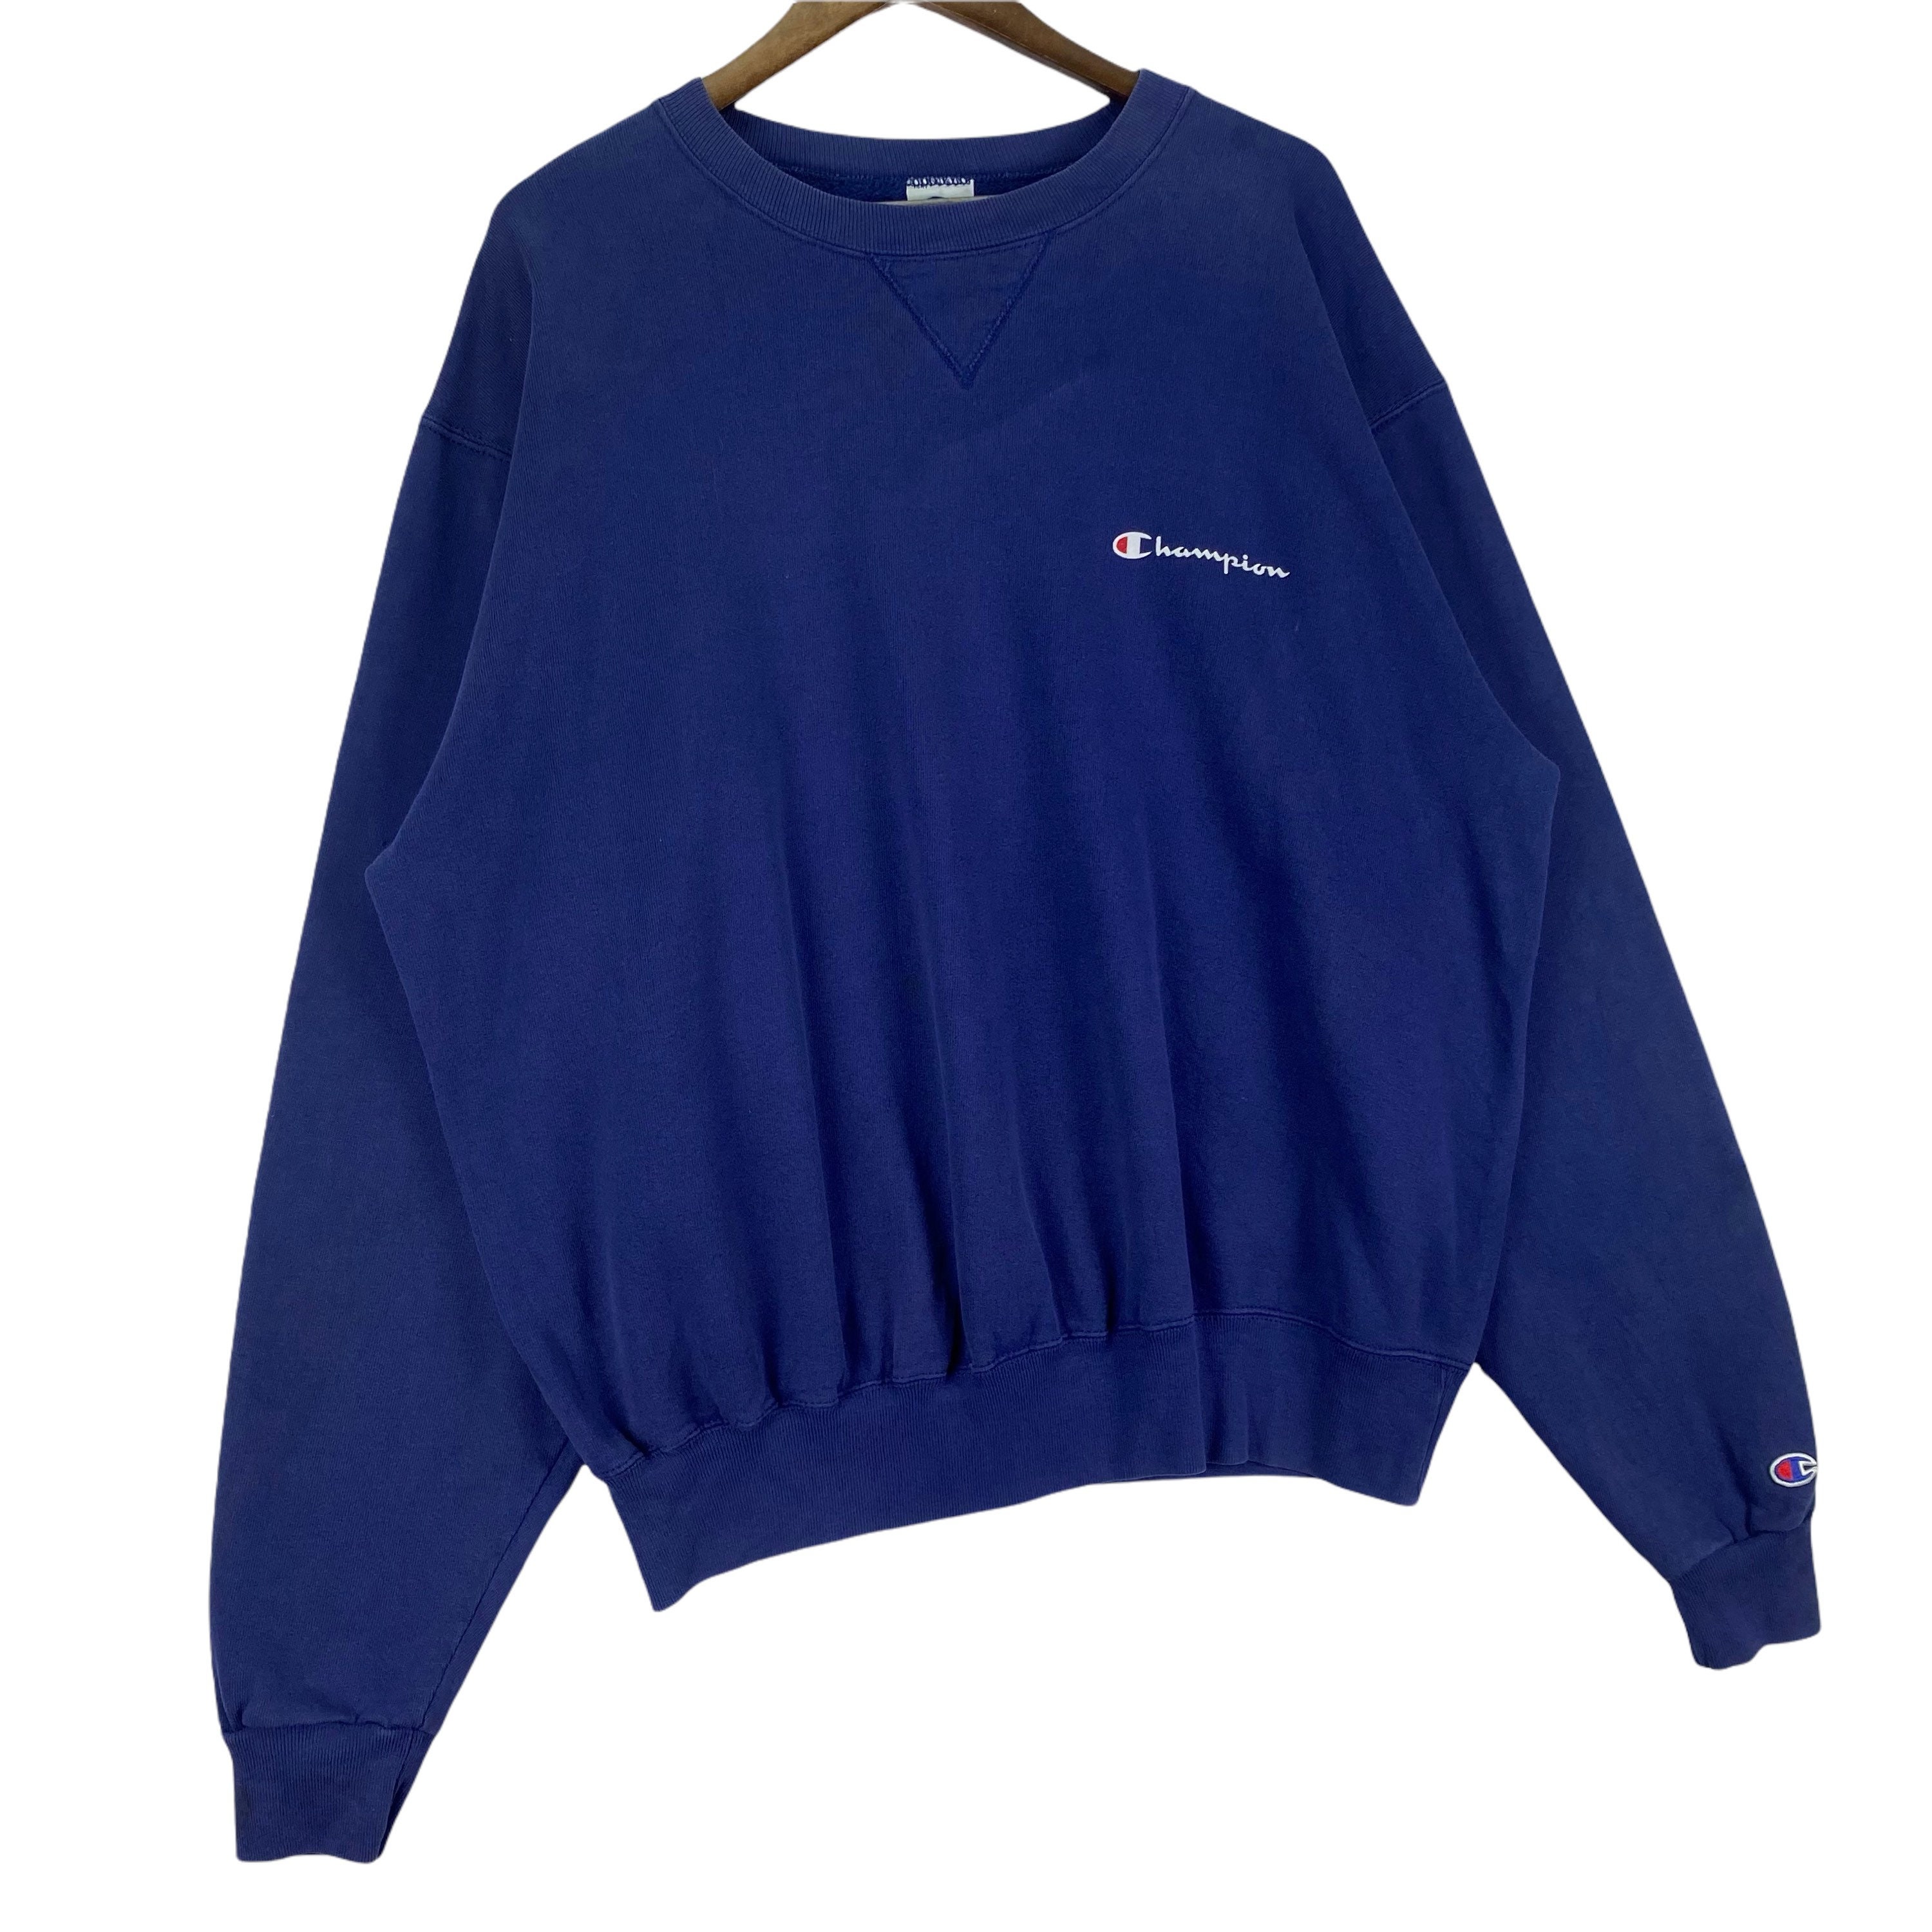 Buy Champion Sweatshirt Crewneck Made in USA Small Online in India Etsy